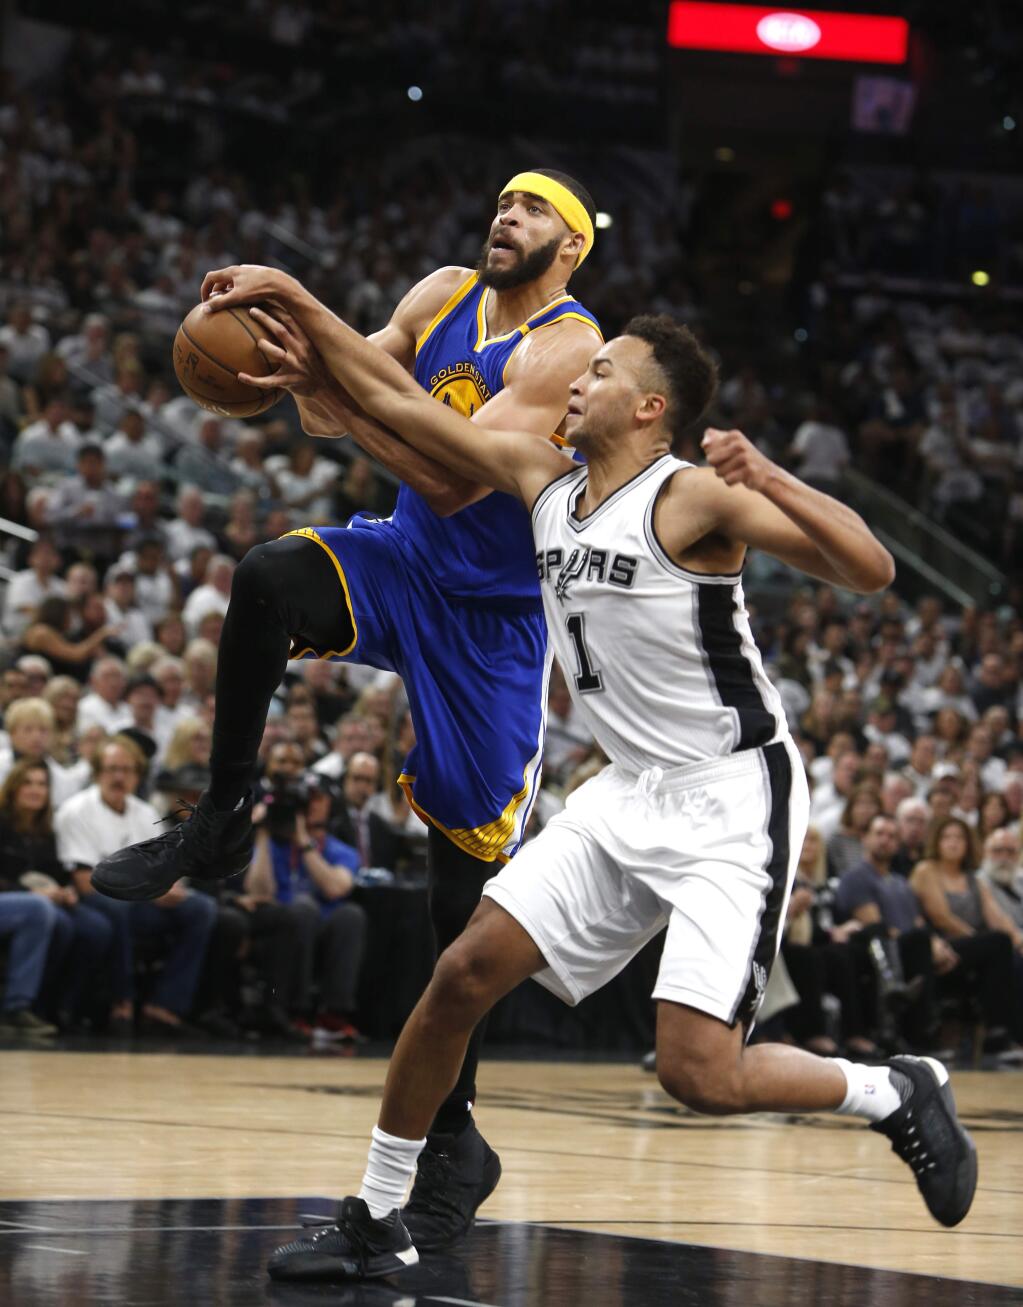 San Antonio Spurs guard Kyle Anderson(1) knocks the ball from a driving Golden State Warriors center JaVale McGee (1) during the first half of Game 3 of of the Western Conference finals on Saturday, May 20, 2017, in San Antonio. (AP Photo/Ronald Cortes)